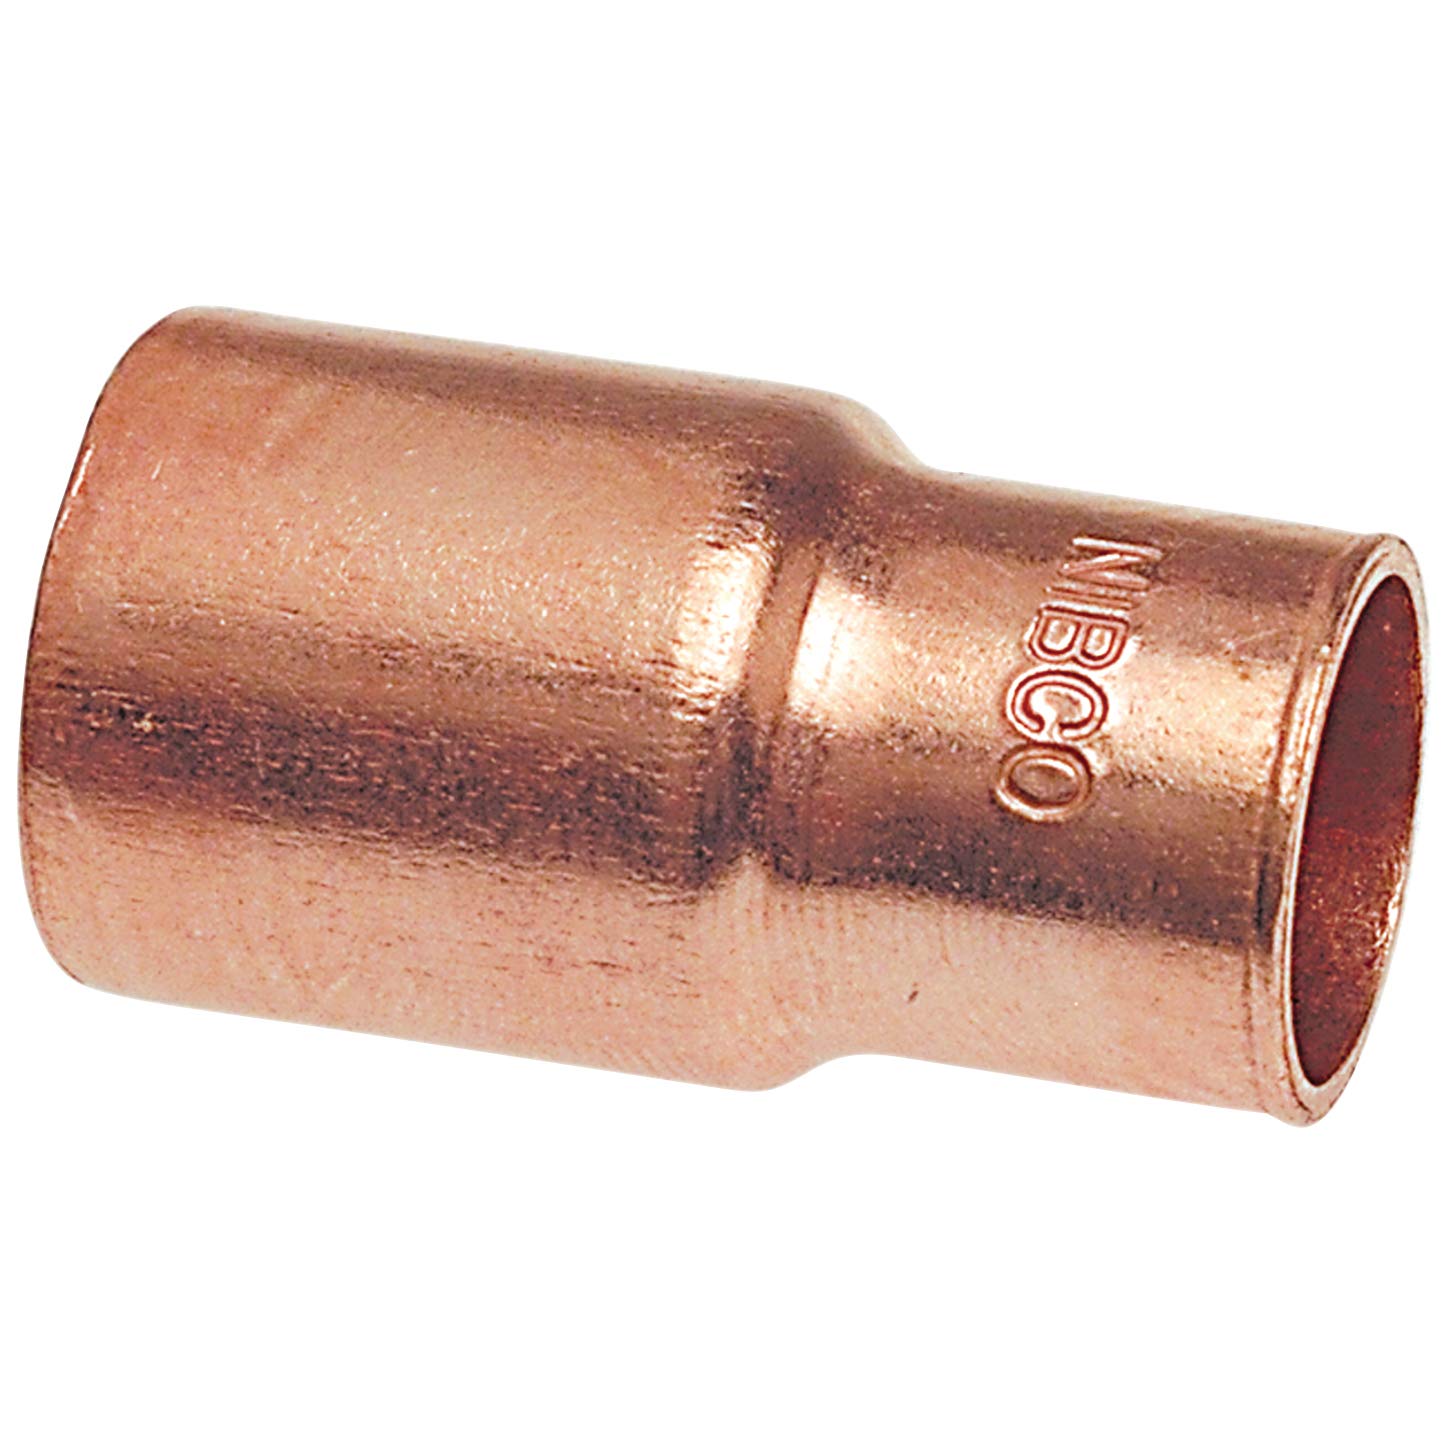 4" x 2-1/2" Fitting Reducer Ftg x C - Wrot Copper, 600-2